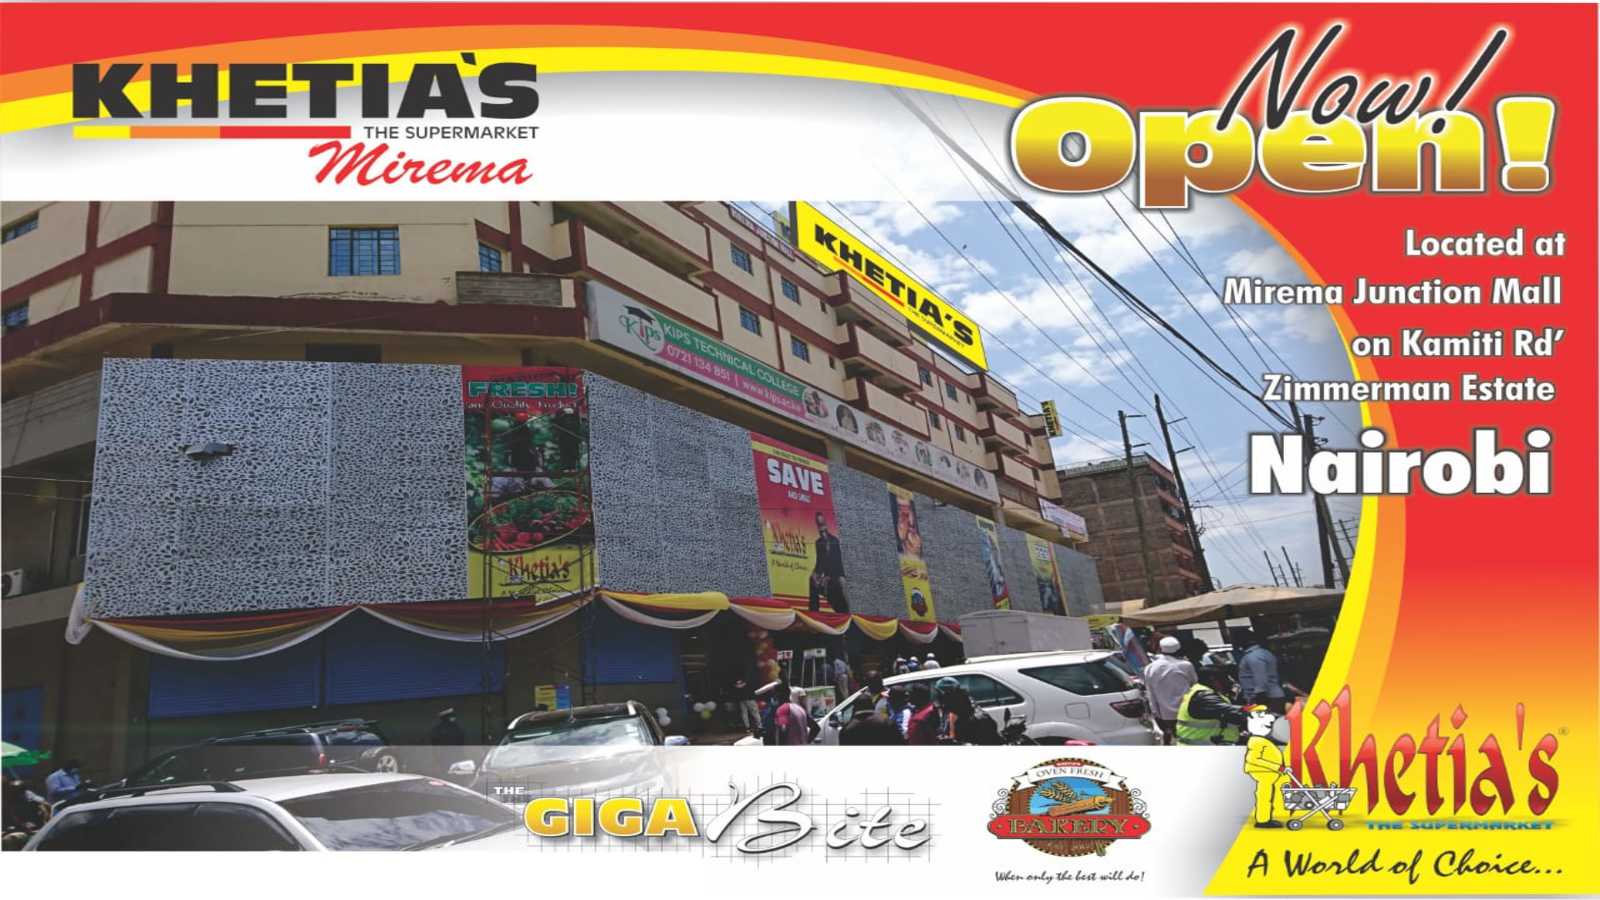 Local Kenyan retailer Khetia’s enters Nairobi, as Quickmart and Carrefour open new outlets